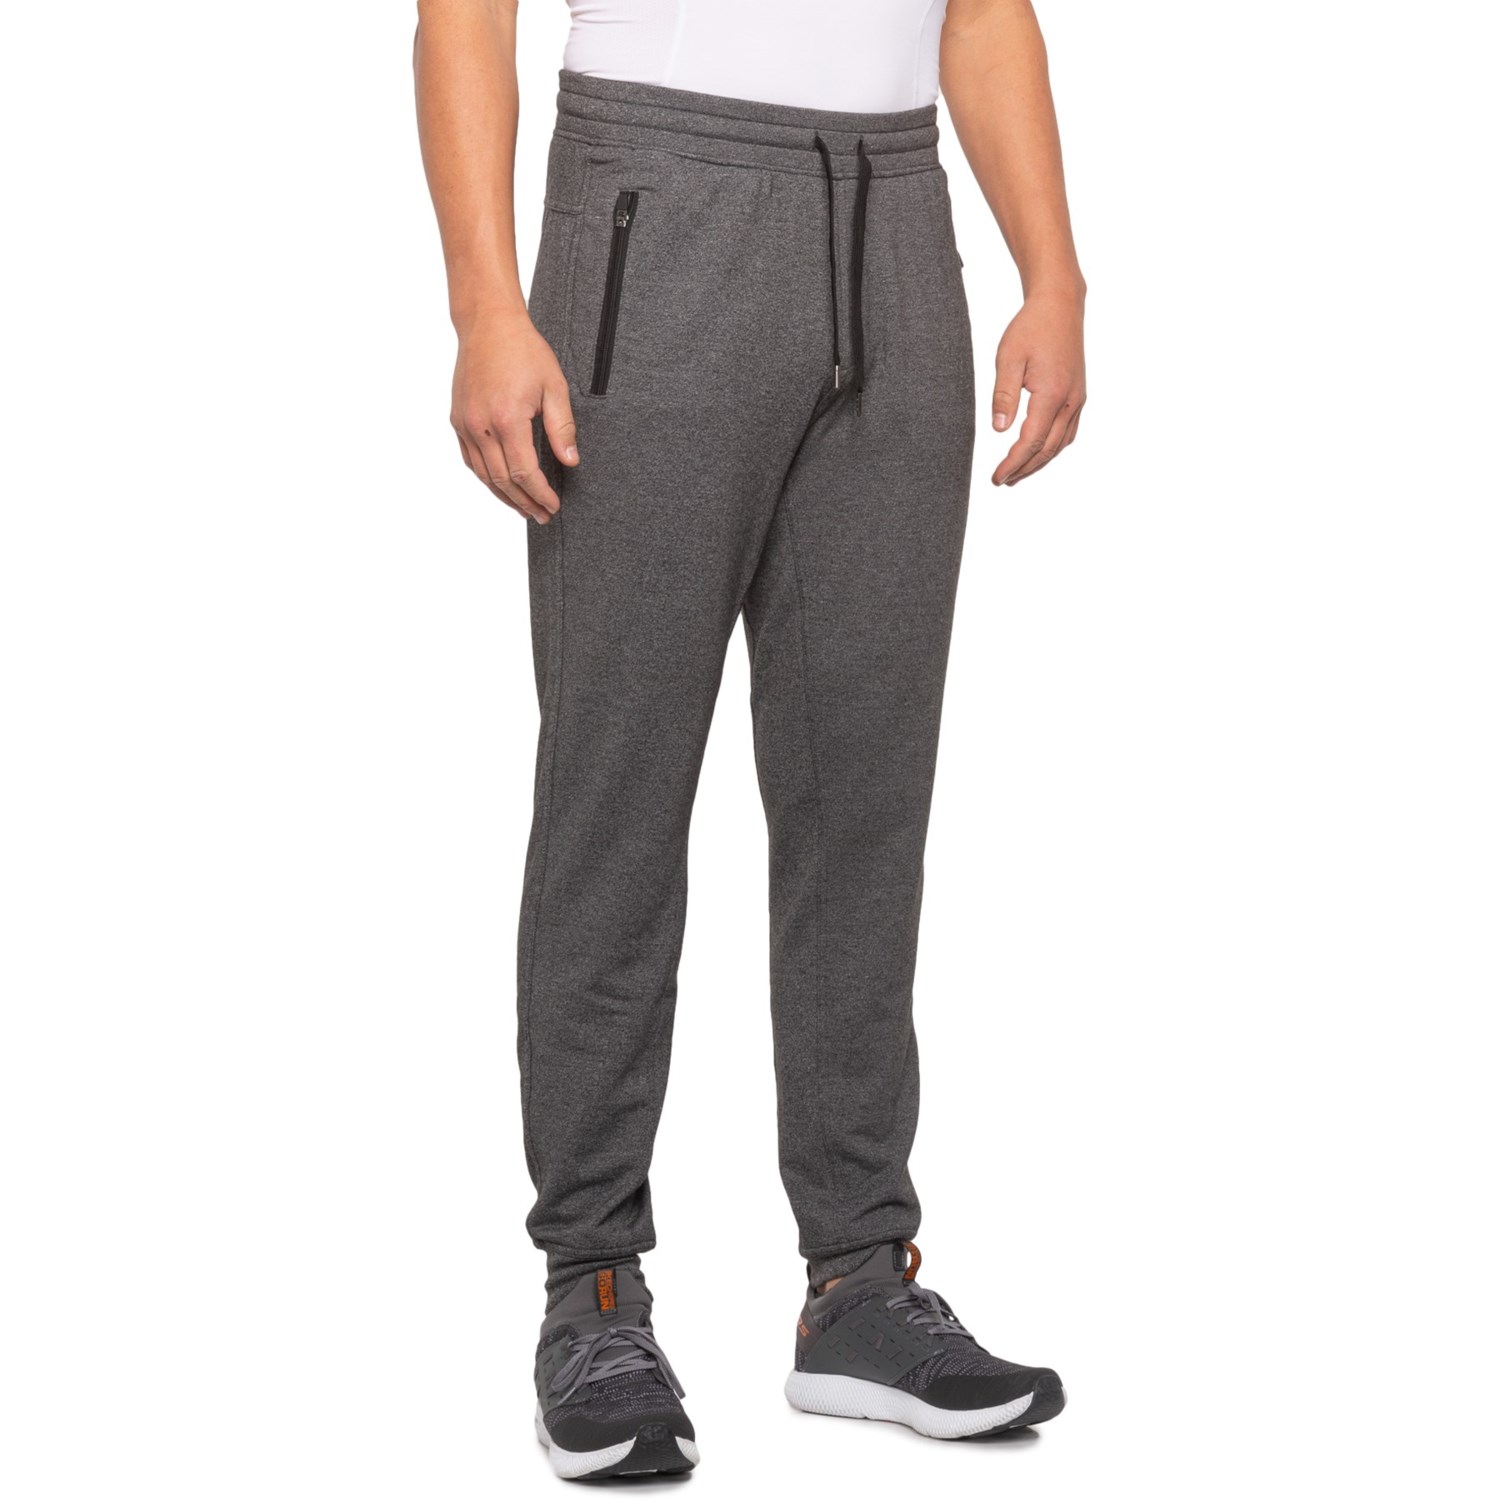 90 Degree by Reflex High-Performance Zip Pocket Joggers (For Men)